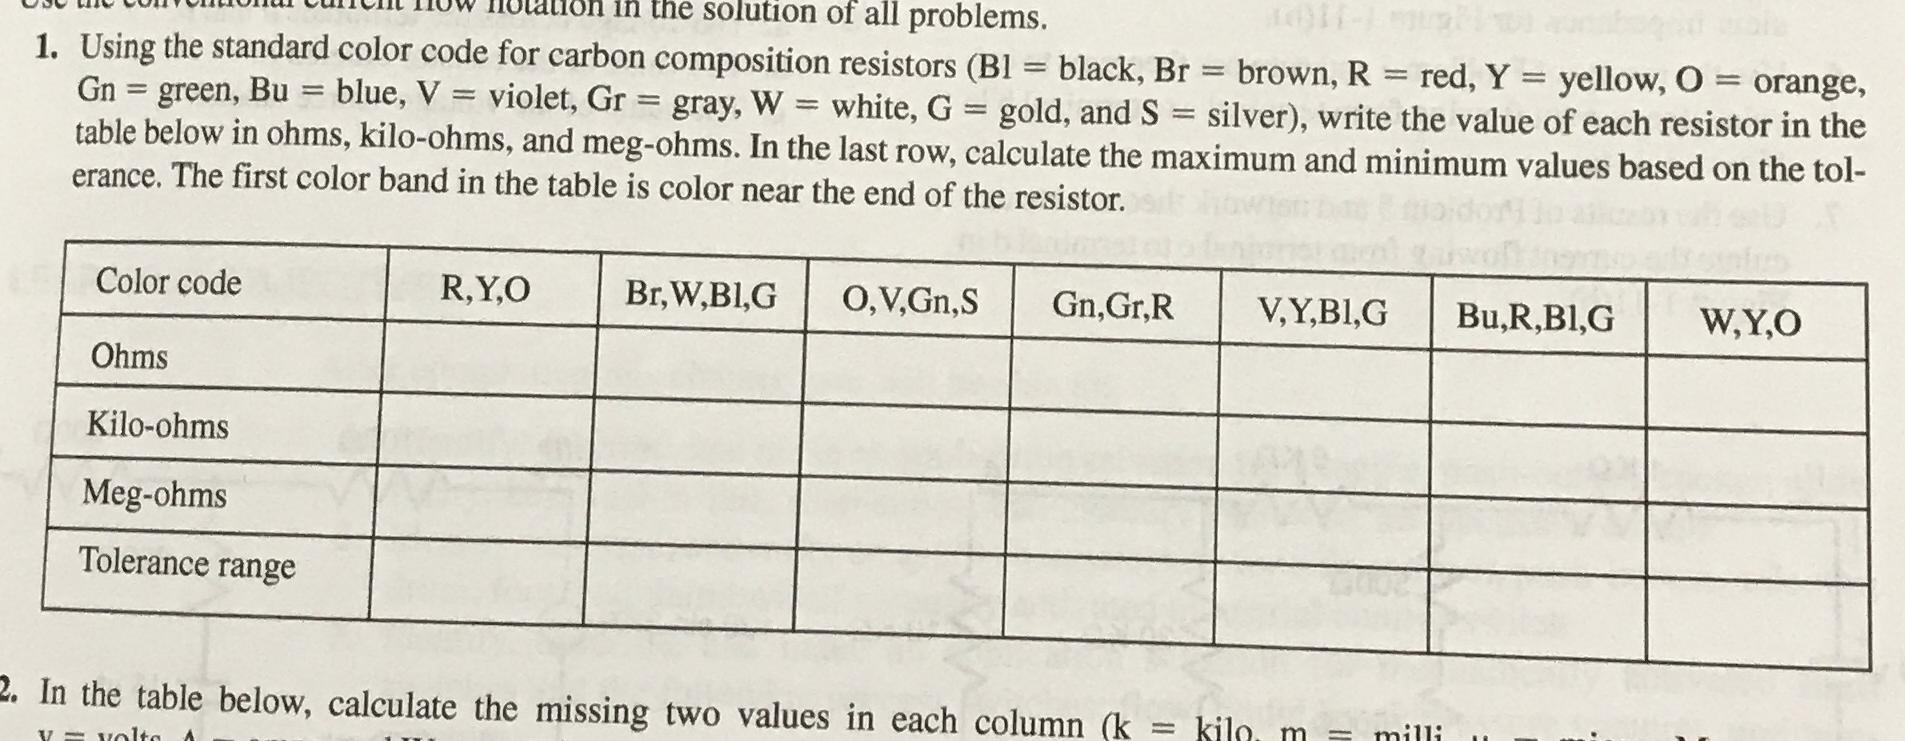 Eee Oig Moe Th We Sotugon Of All Problems Aqt Mg Wi n Boypal Wate 1 Using The Standard Color Code For Carbon Composition Resistors Bi Black Br Brown